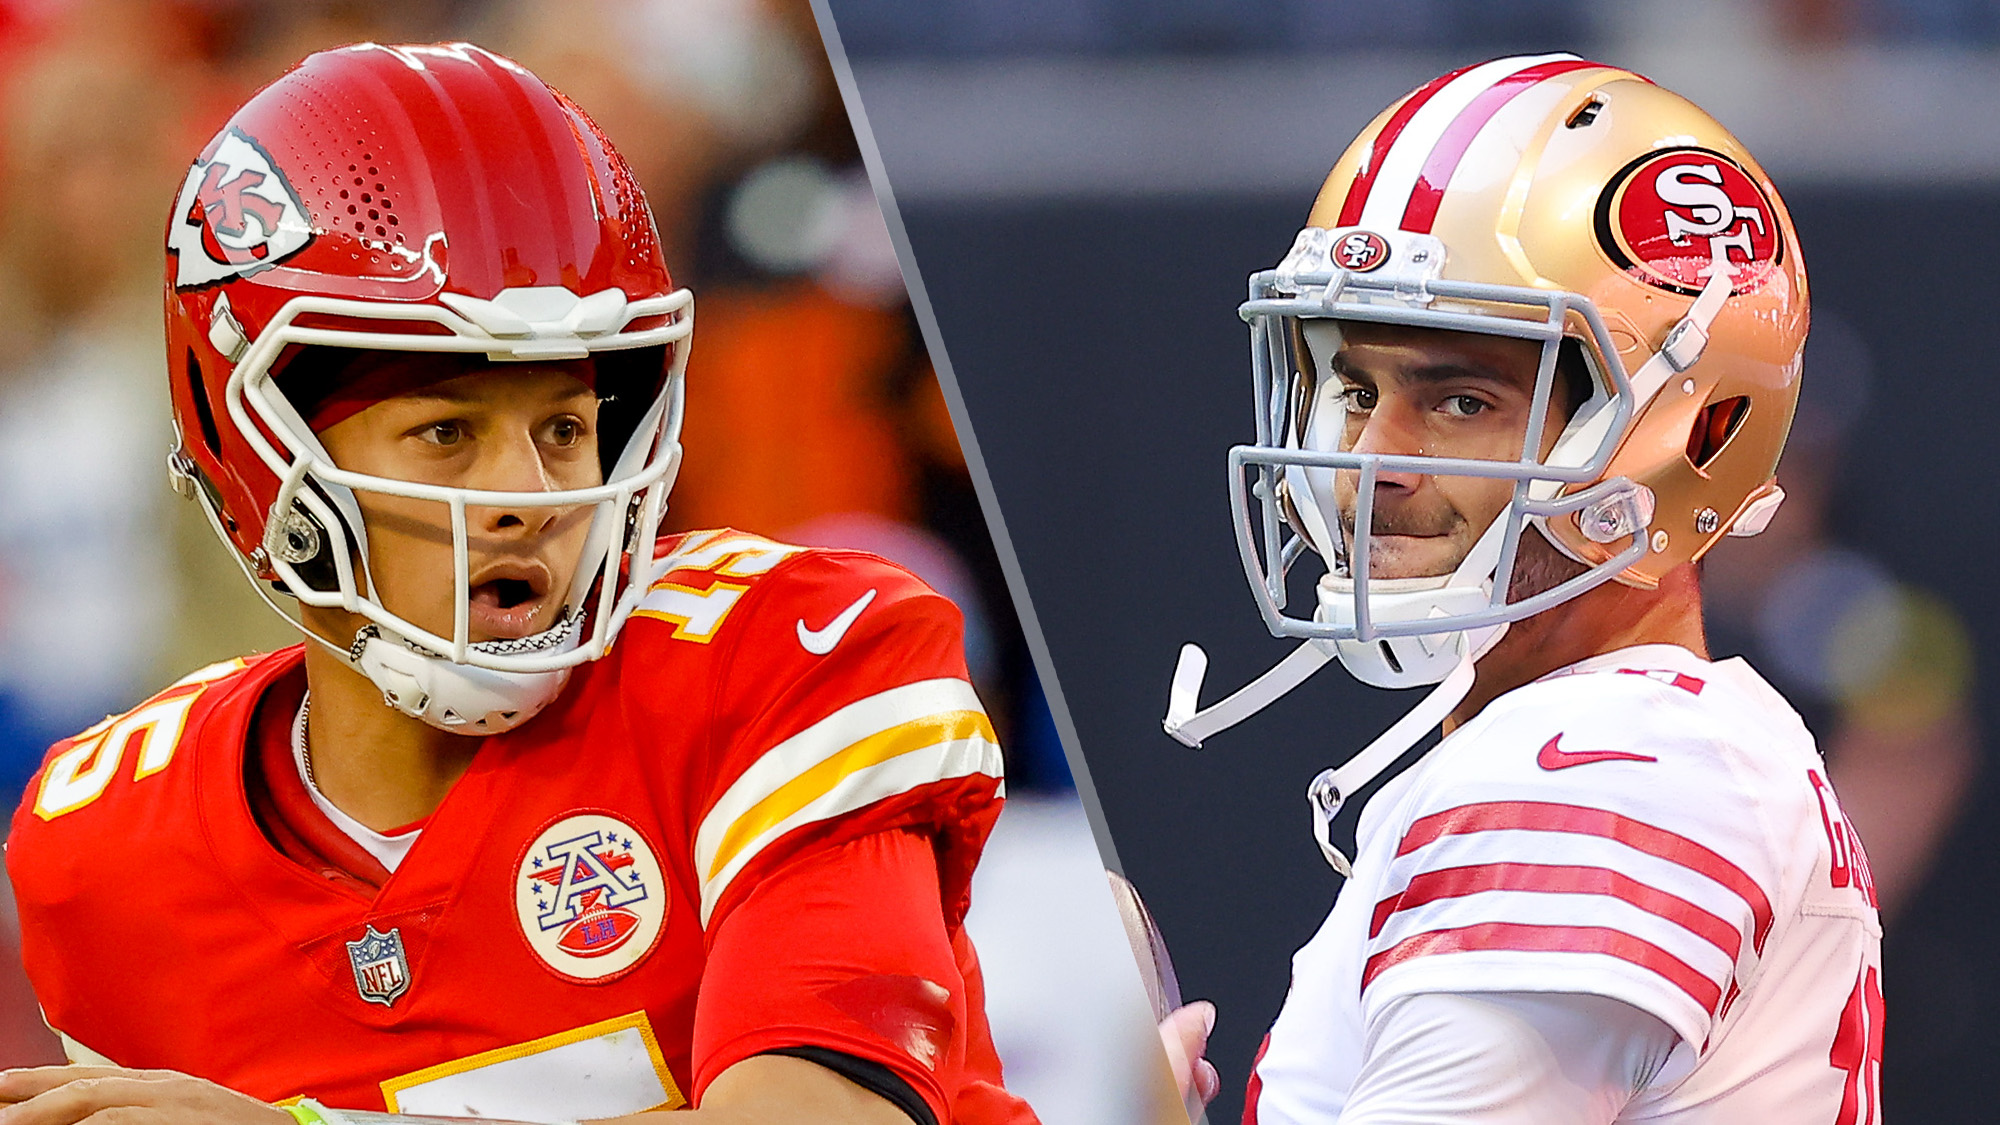 Chiefs vs 49ers live stream: How to watch 2021 NFL preseason game online